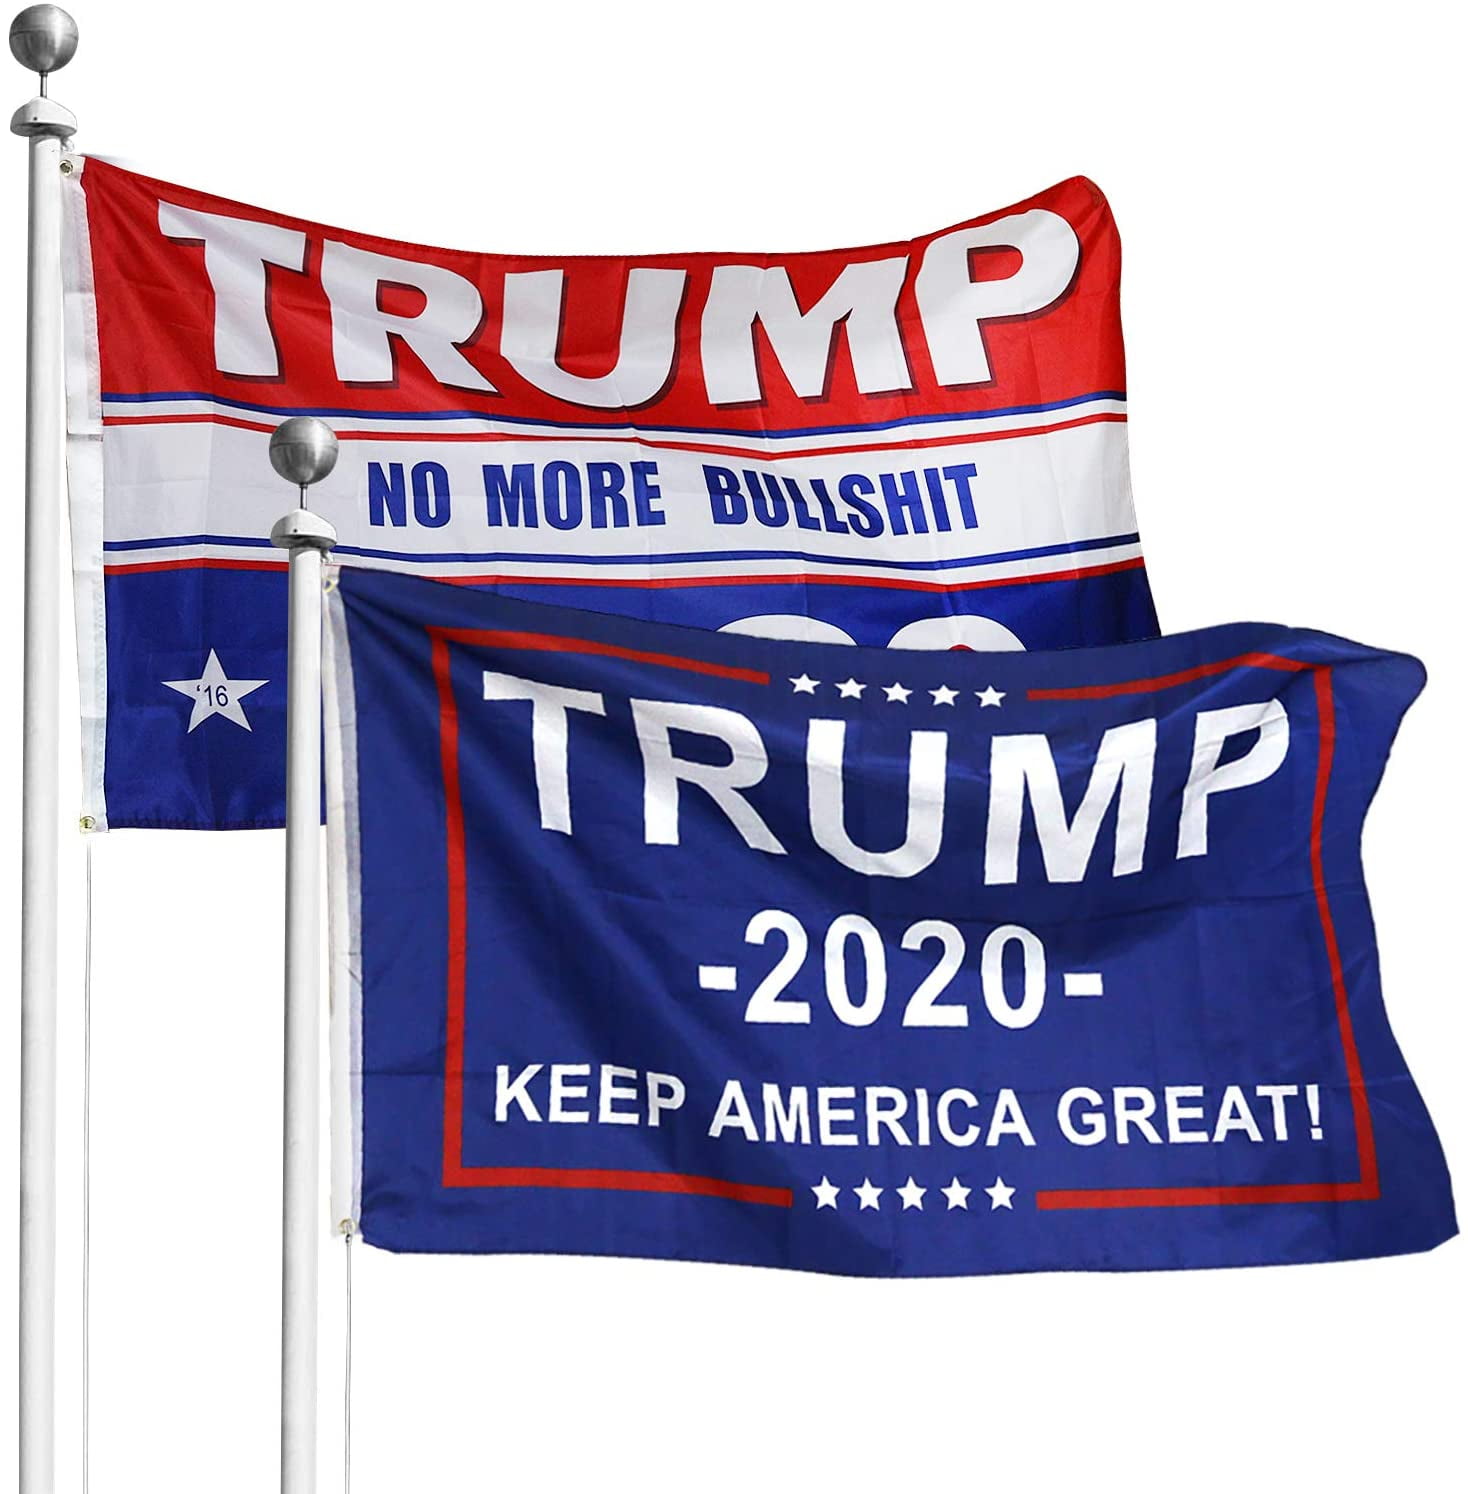 Trump 2020 Bumper Stickers Keeping American Great Decals 3" wide 10pack RWB Rbdr 